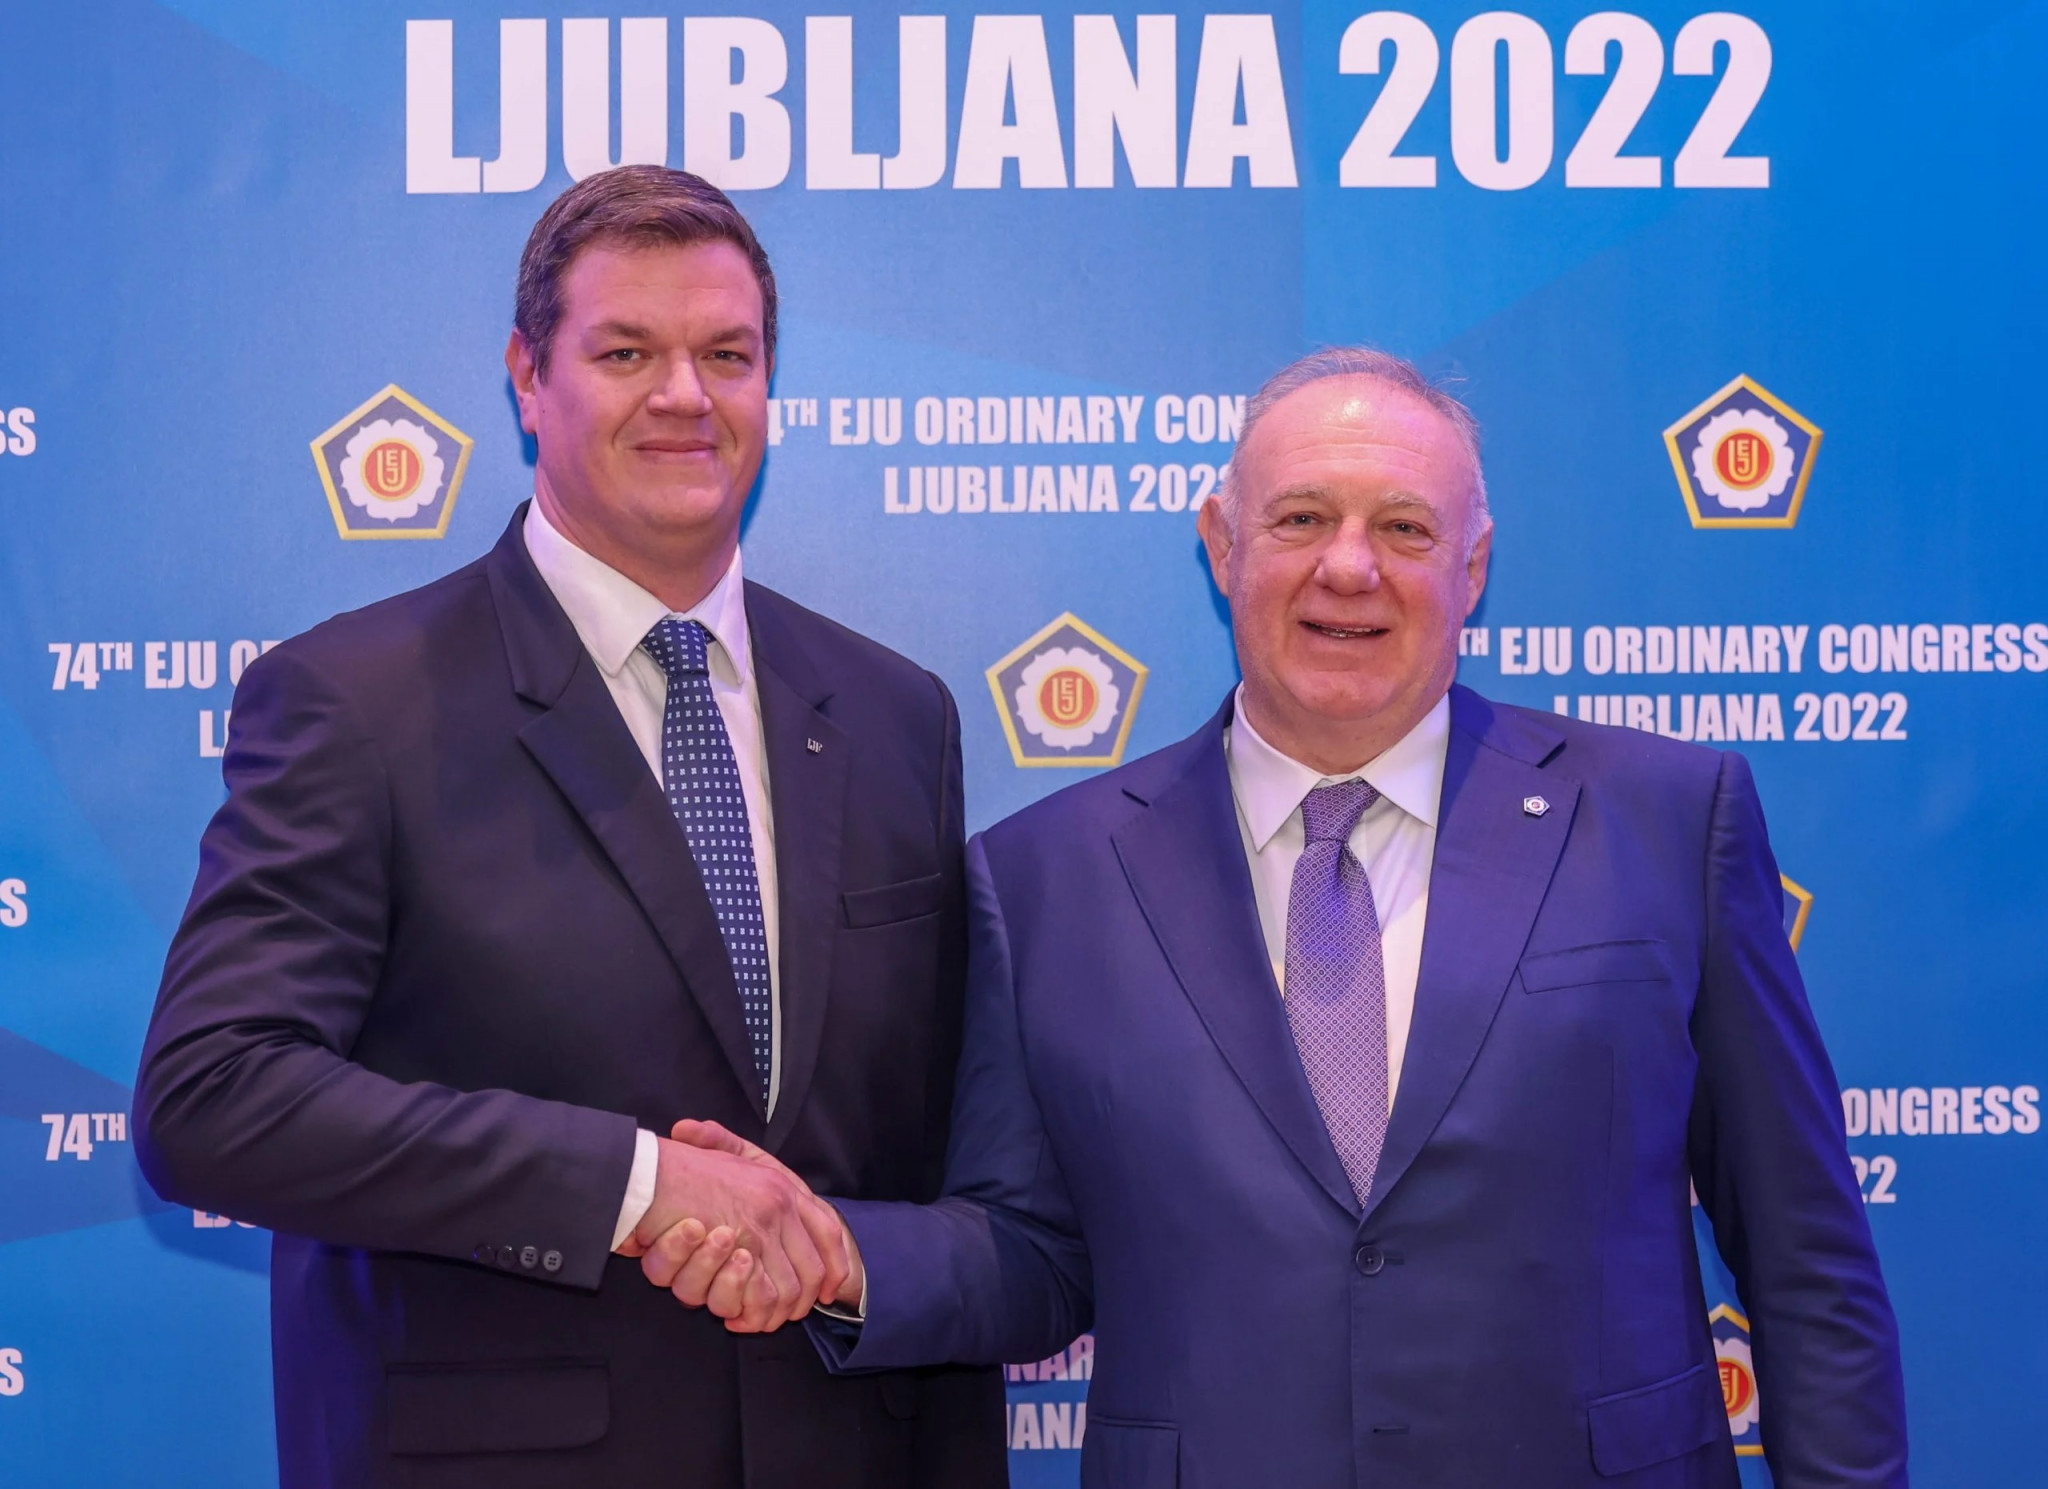 László Tóth, right, insists that "cooperation is key to success" in 2023 ©EJU